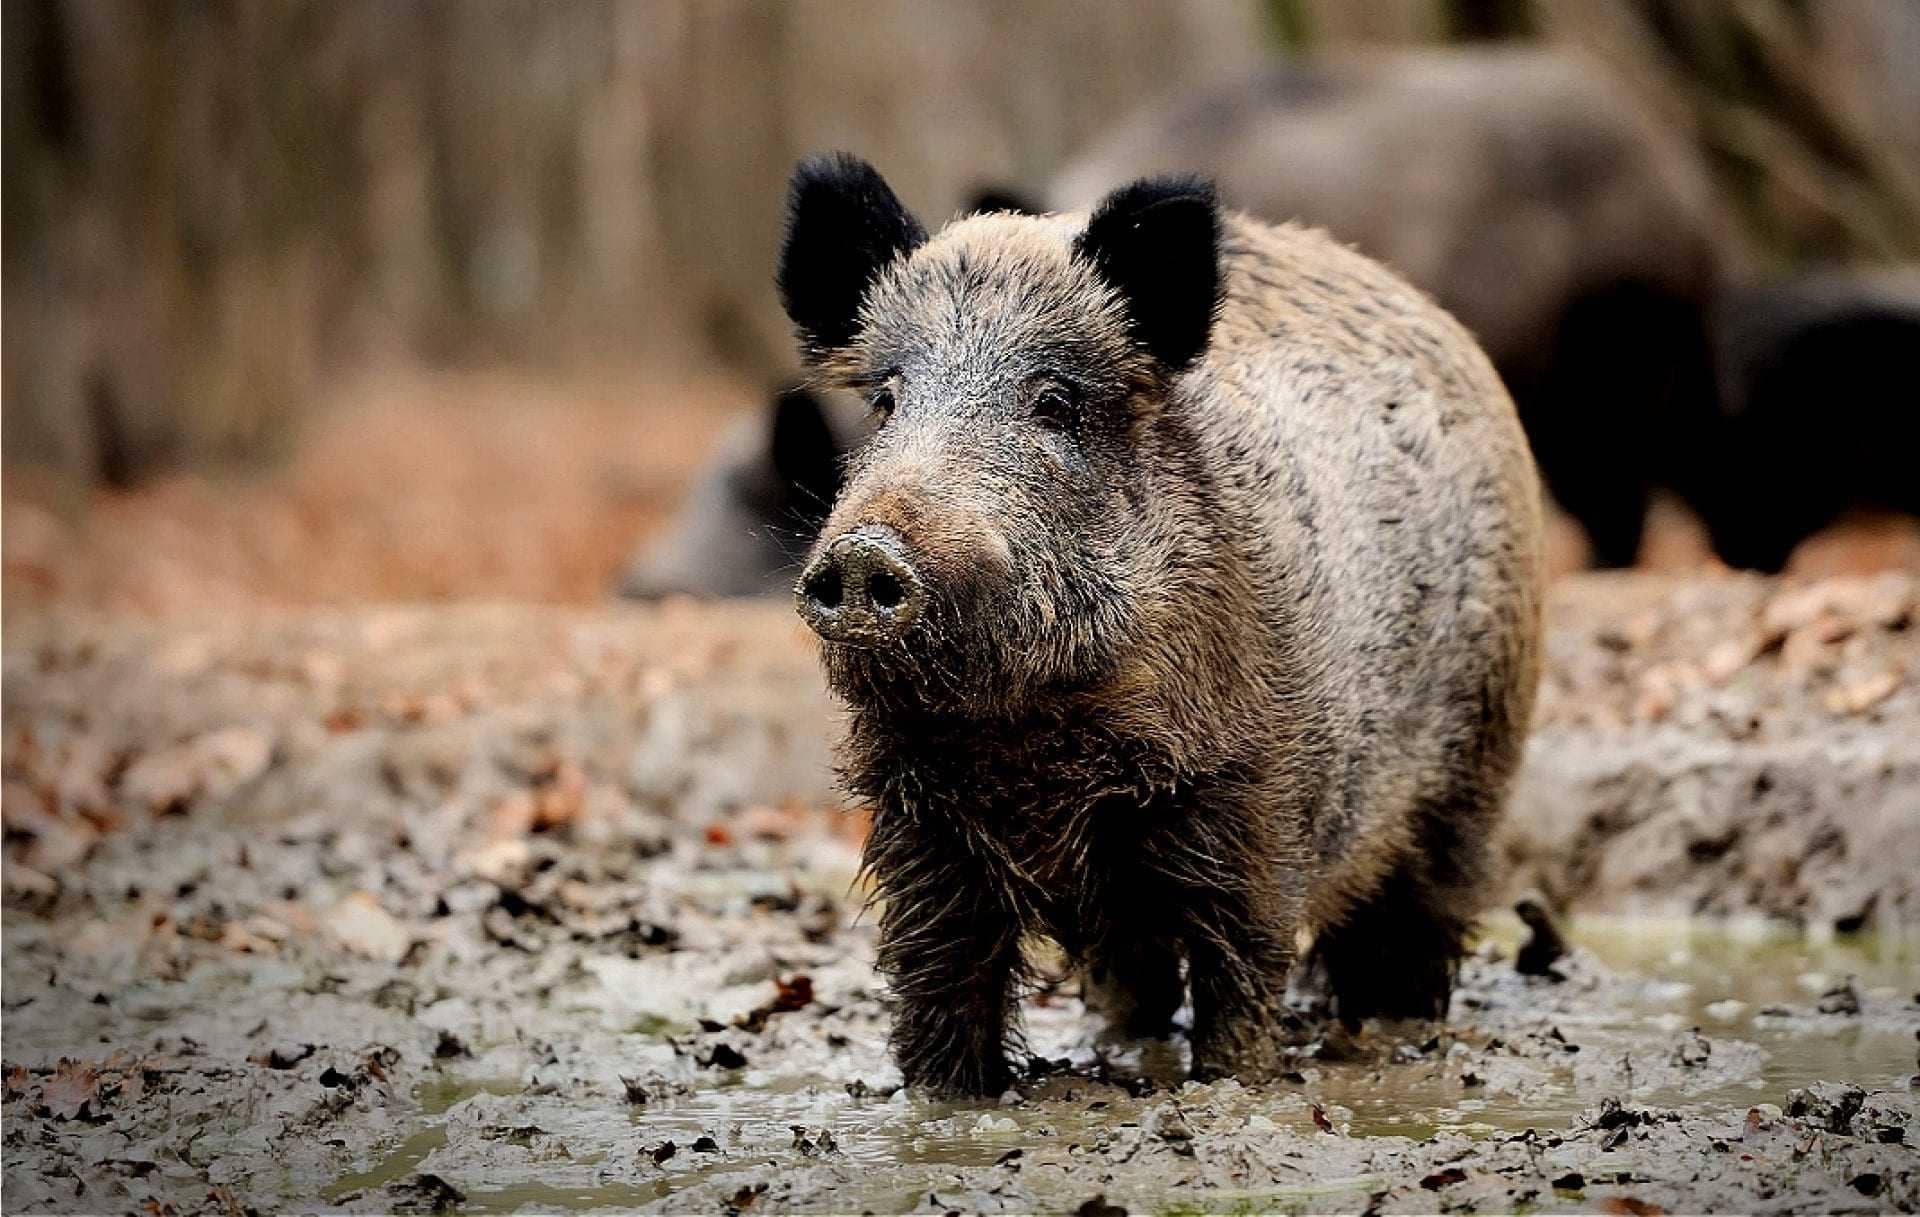 Italian Farmers Want Something Done About Wild Boars - Olive Oil Times